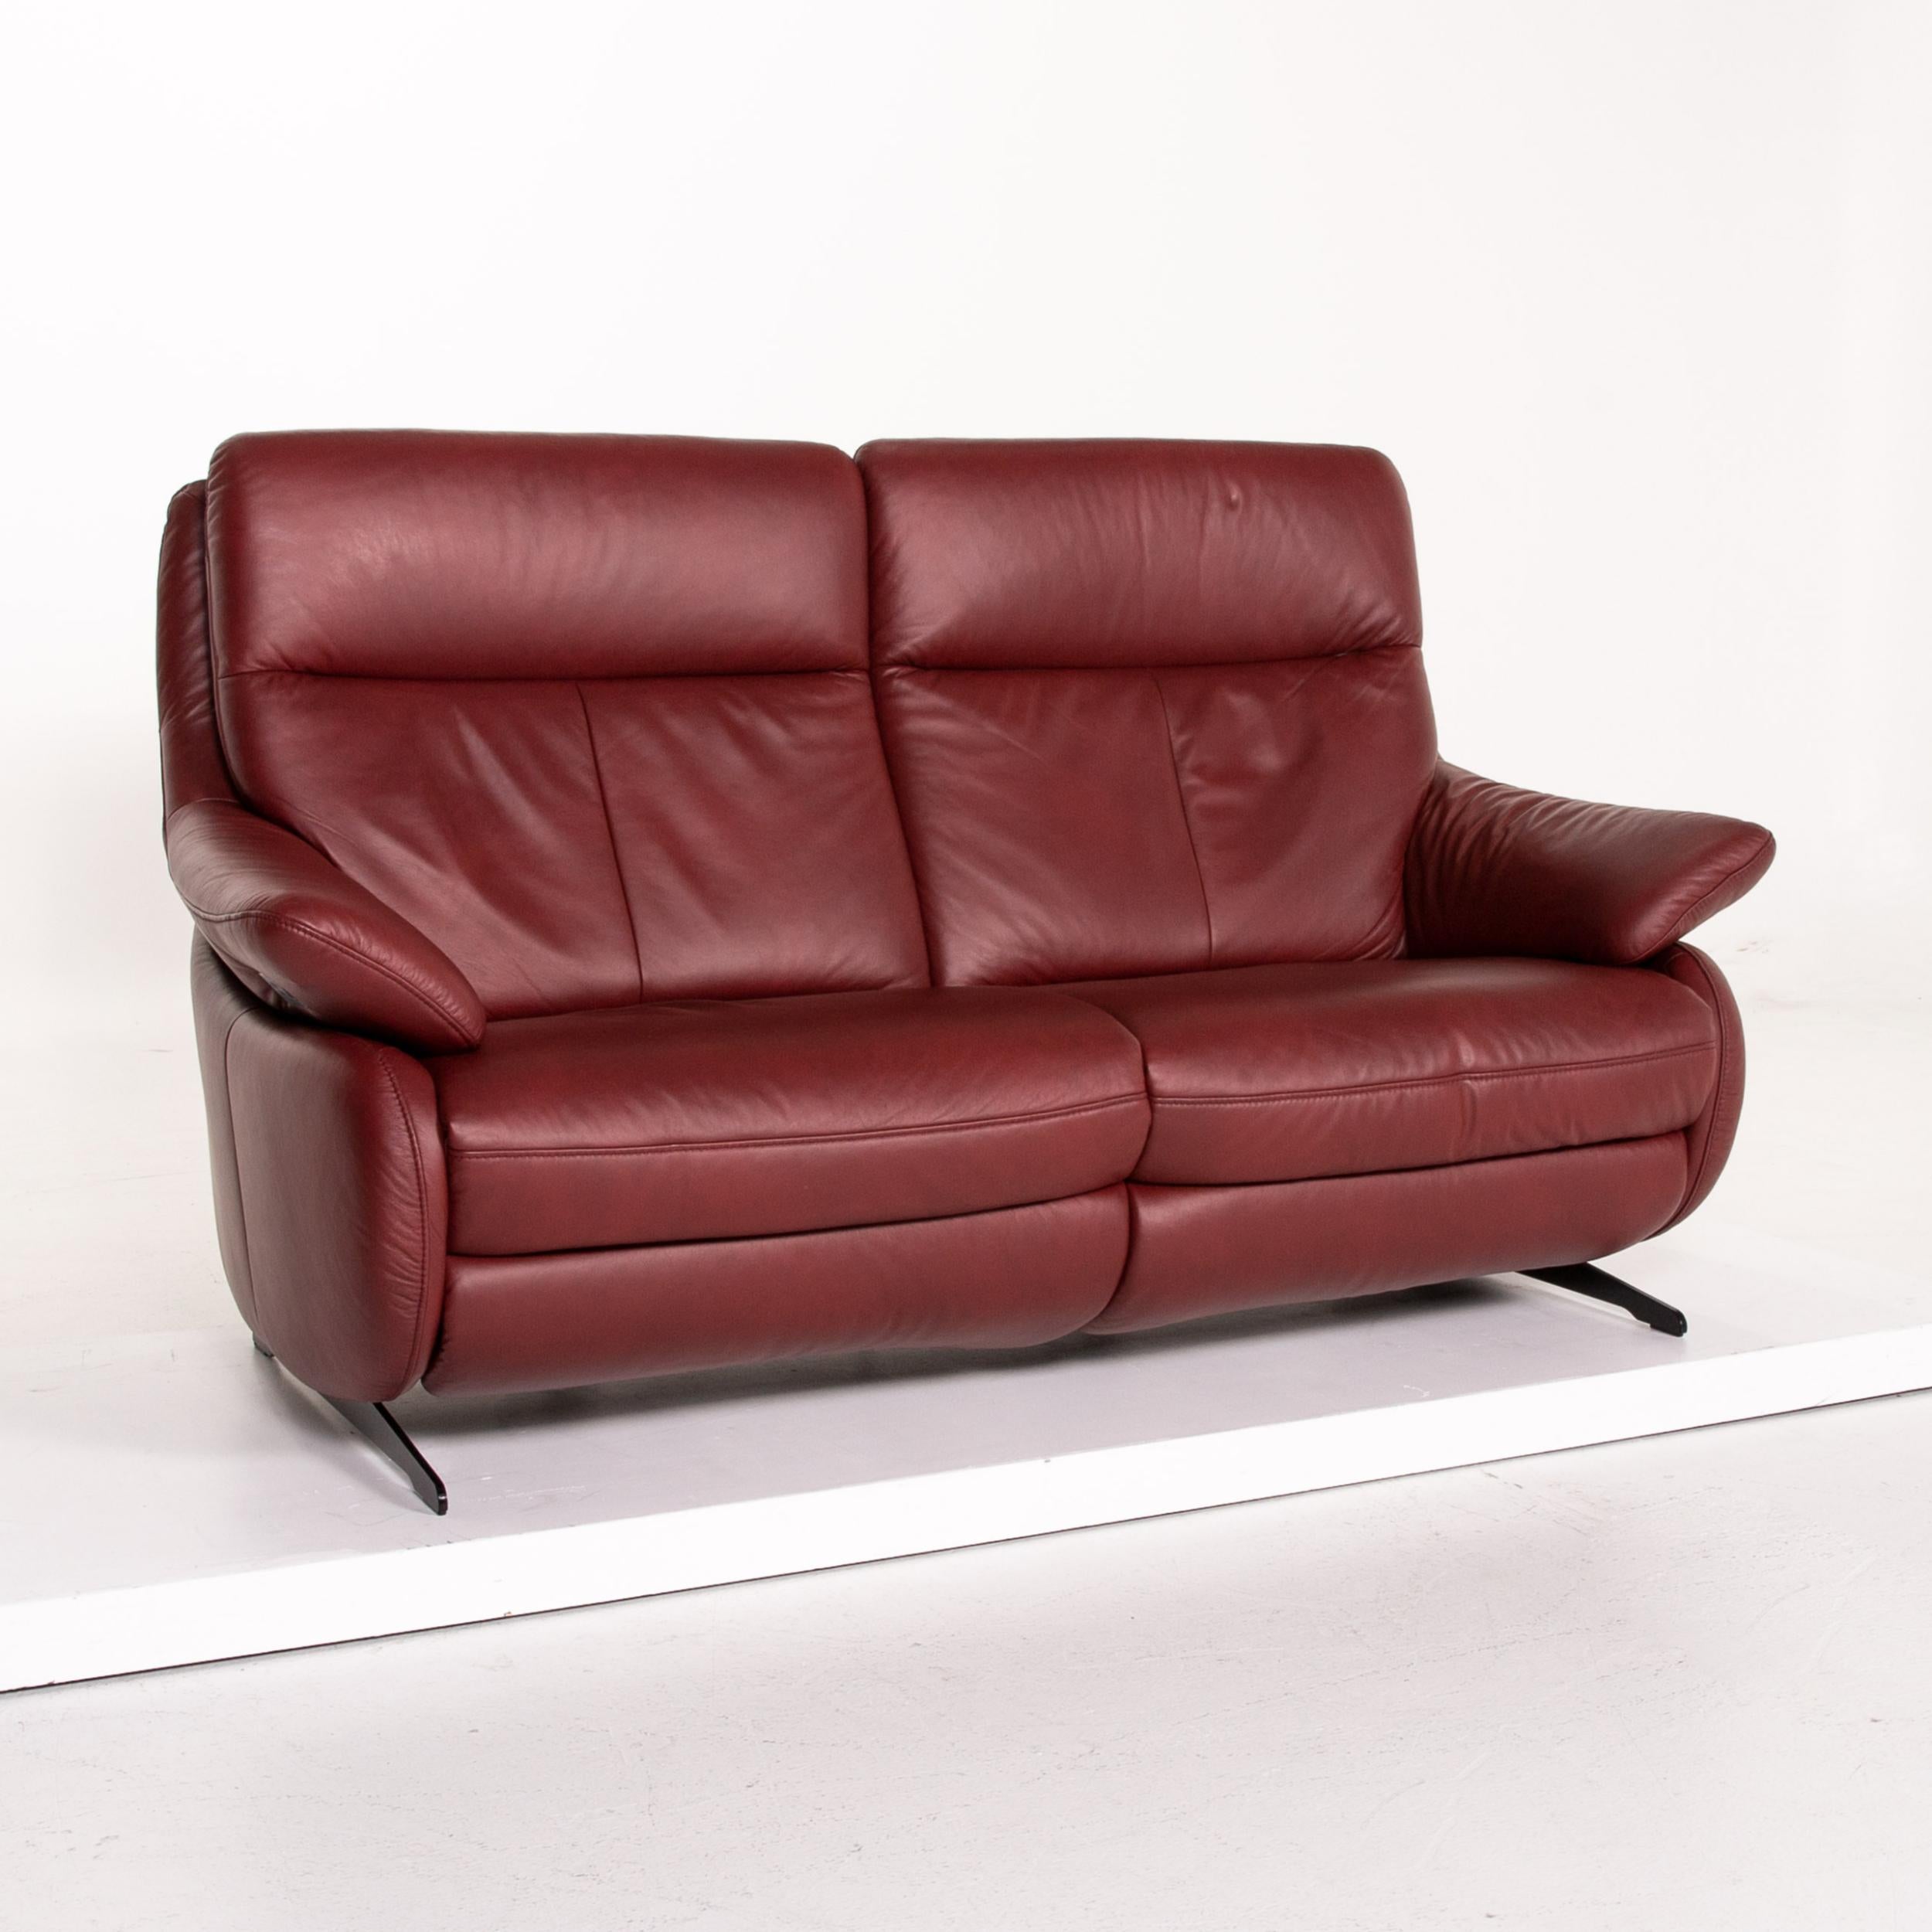 Contemporary Himolla Leather Sofa Electric Function Red Dark Red Relax Function Couch For Sale